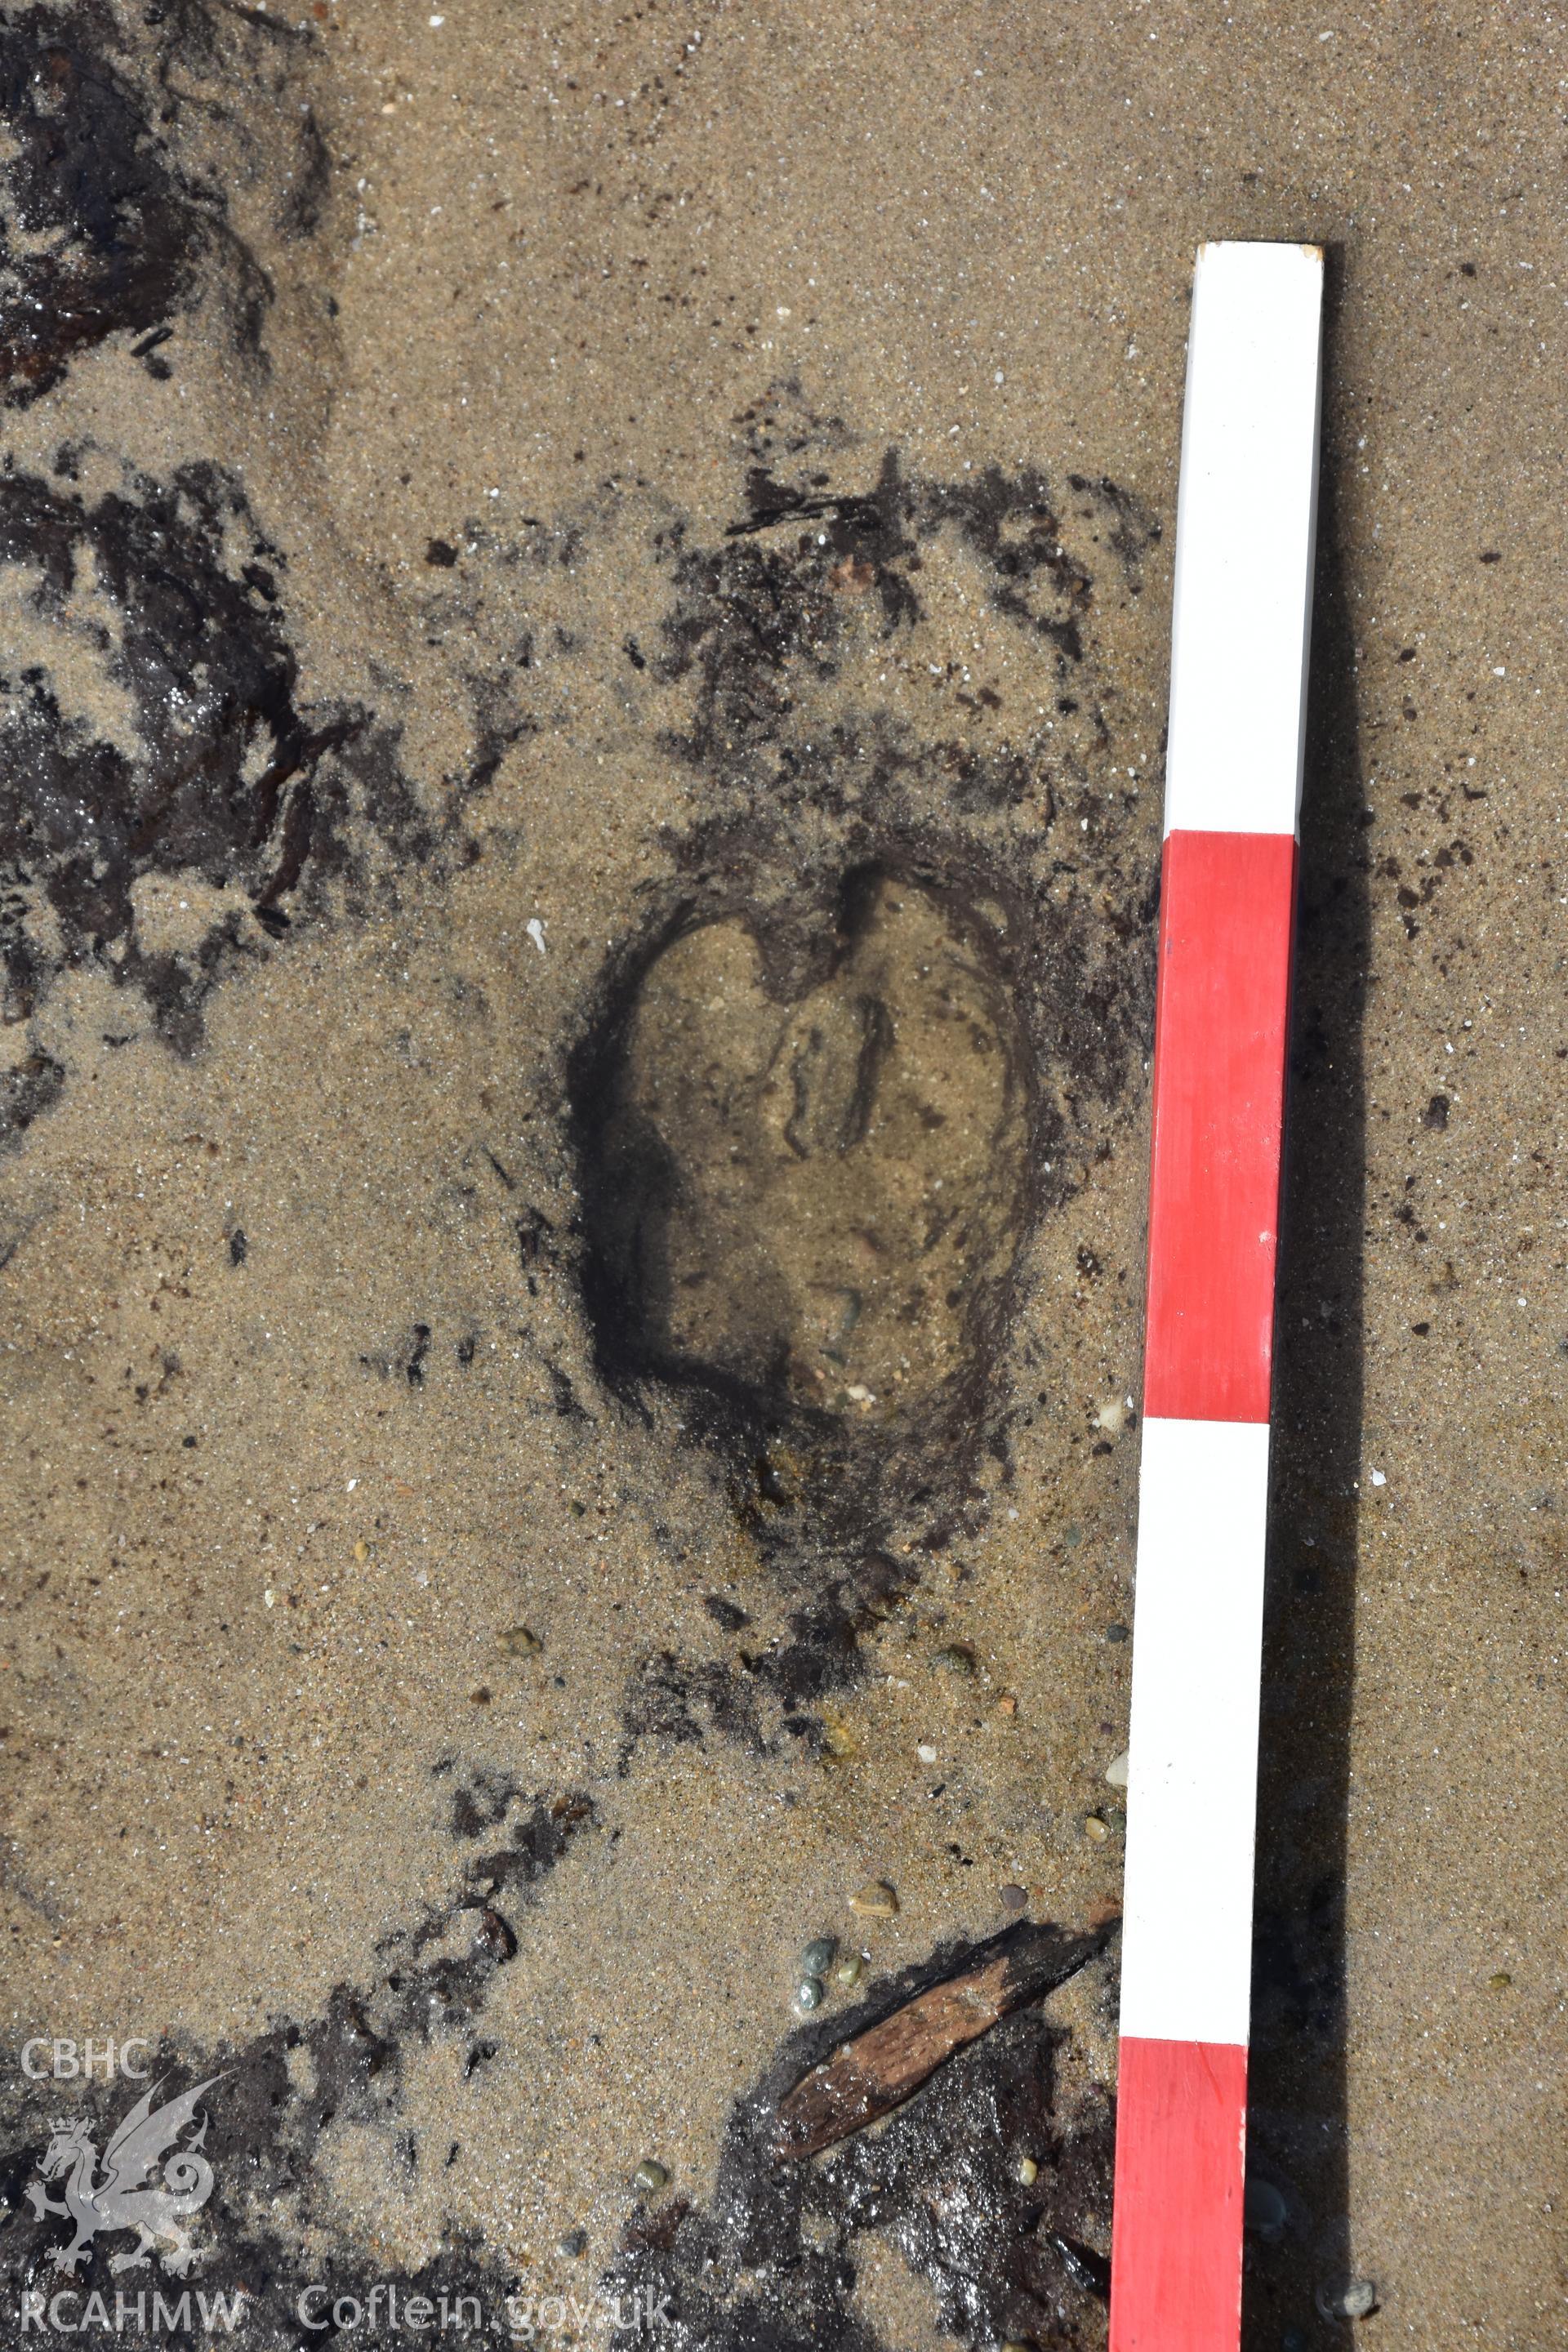 The Warren peat exposures. Photography of prehistoric animal footprints including deer and aurochs clearly marked in the peat surface. Recorded with GNSS and photogrammetry for the CHERISH Project. ? Crown: CHERISH PROJECT 2017. Produced with EU funds through the Ireland Wales Co-operation Programme 2014-2020. All material made freely available through the Open Government Licence.